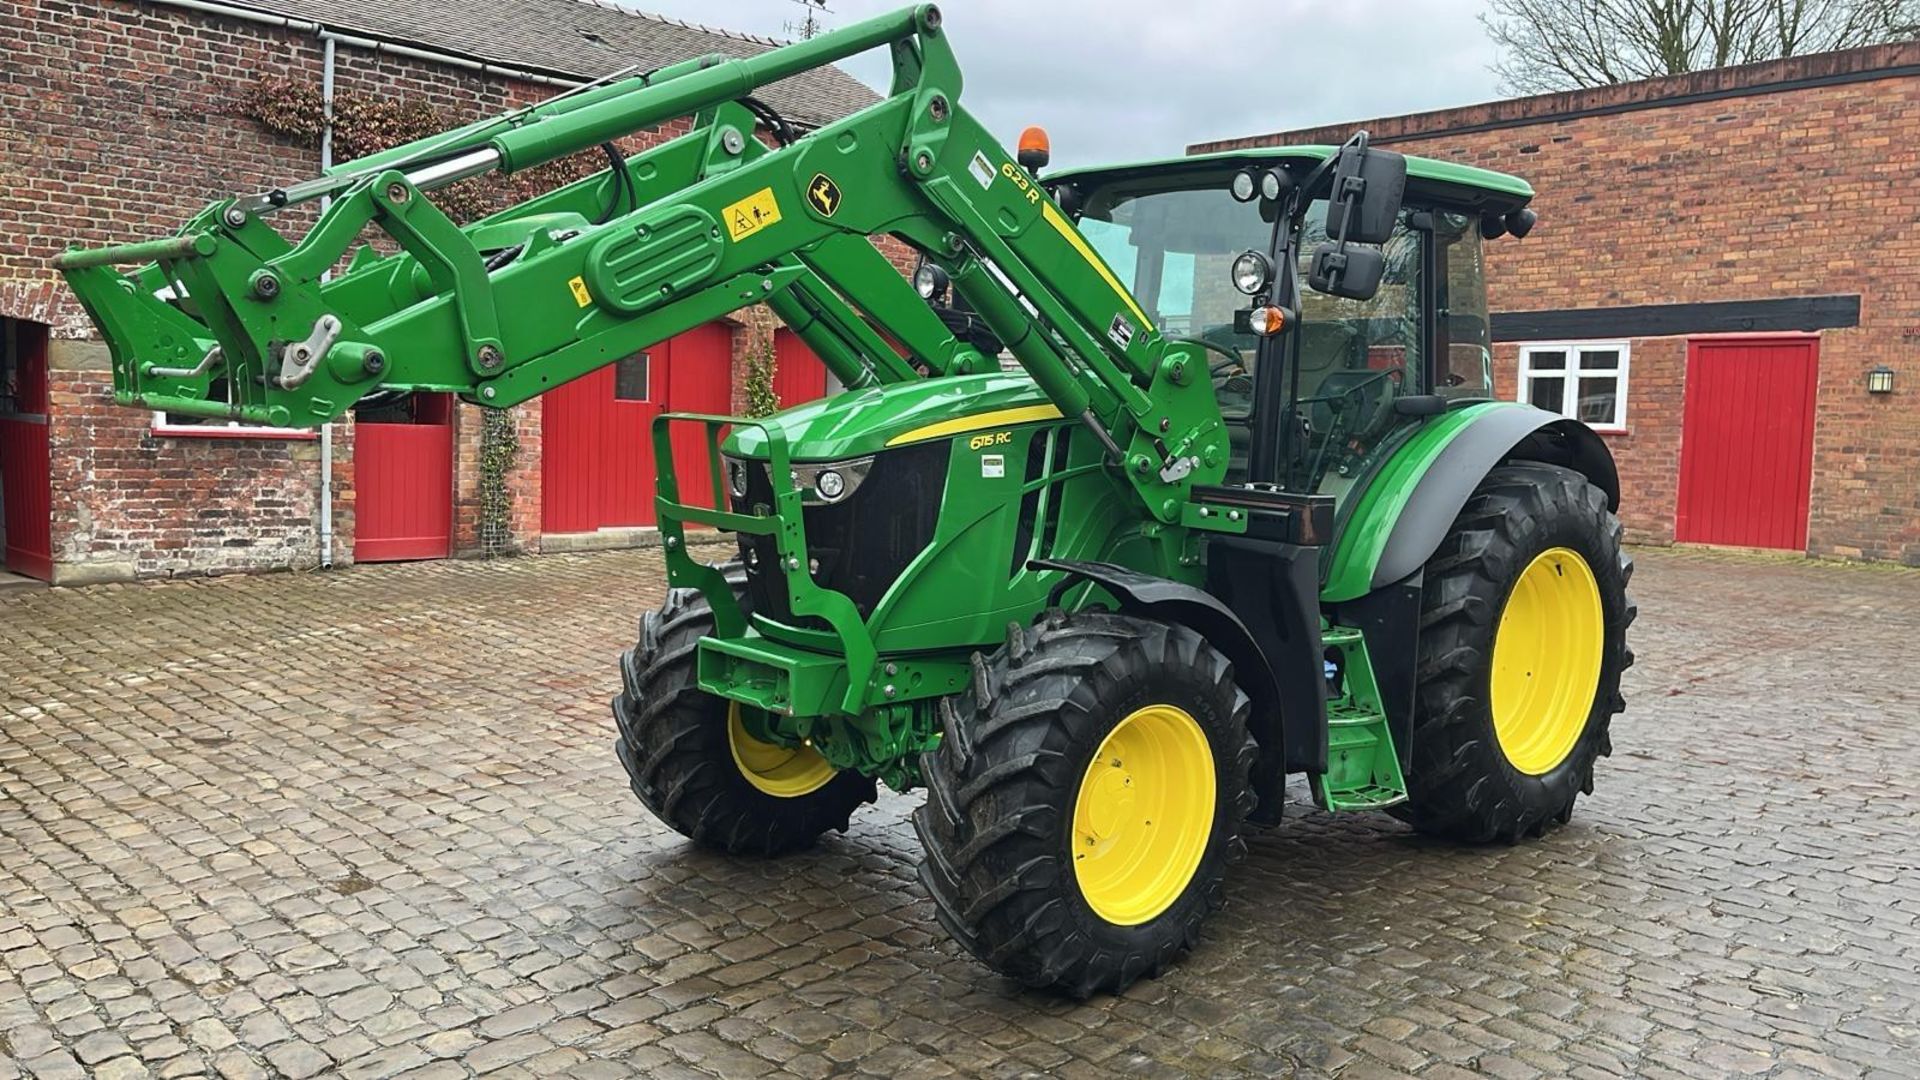 2019 JOHN DEERE 6115RC TRACTOR PE19HBL 115 HP WITH JOHN DEERE 623R FRONT LOADER 1279 HOURS AT